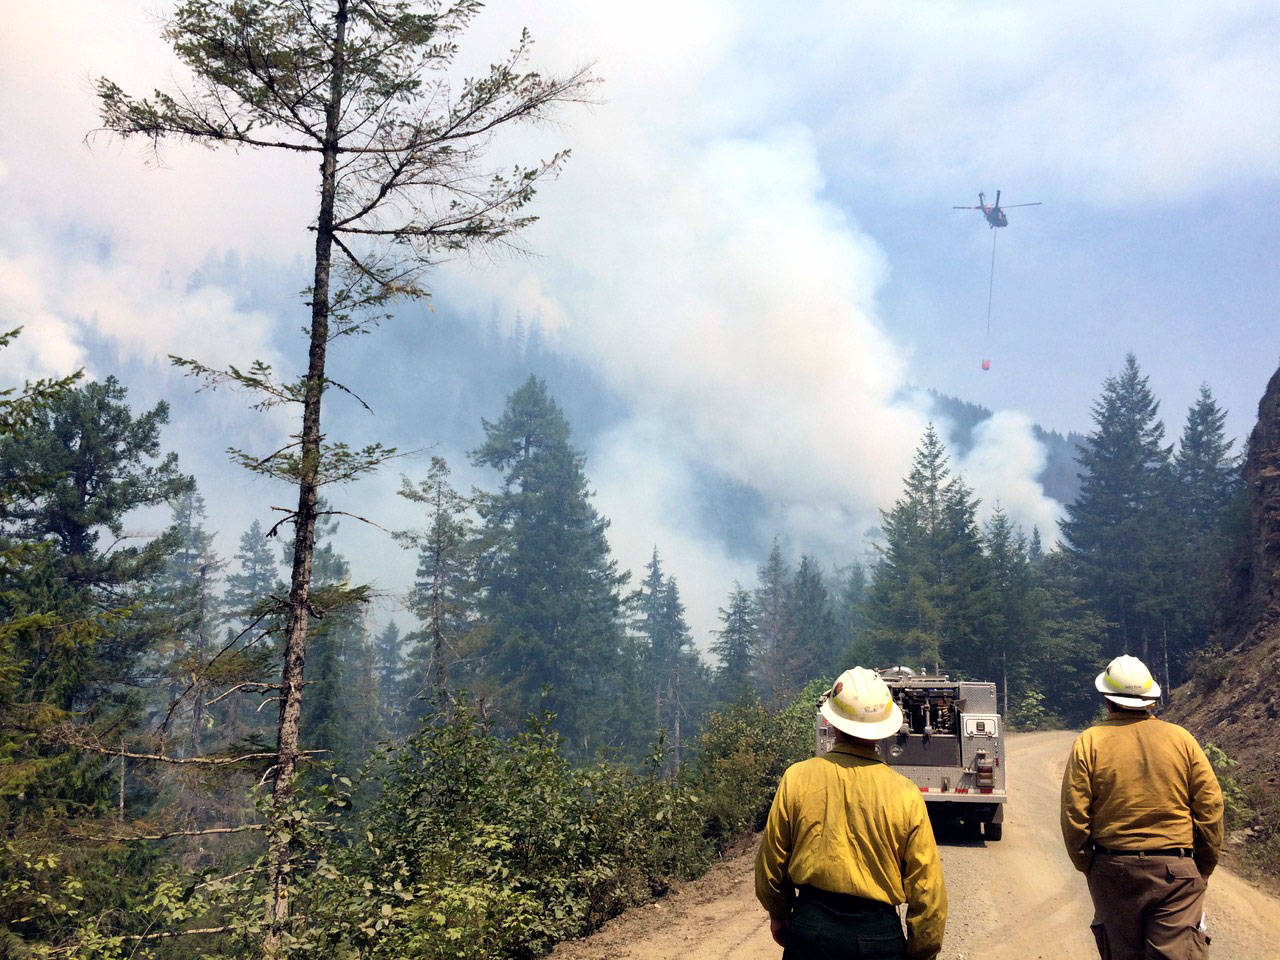 Firefighters approach the Maple Fire in Mason County in August 2018 as a helicopter in the distance drops water on the blaze. (State Department of Natural Resources)